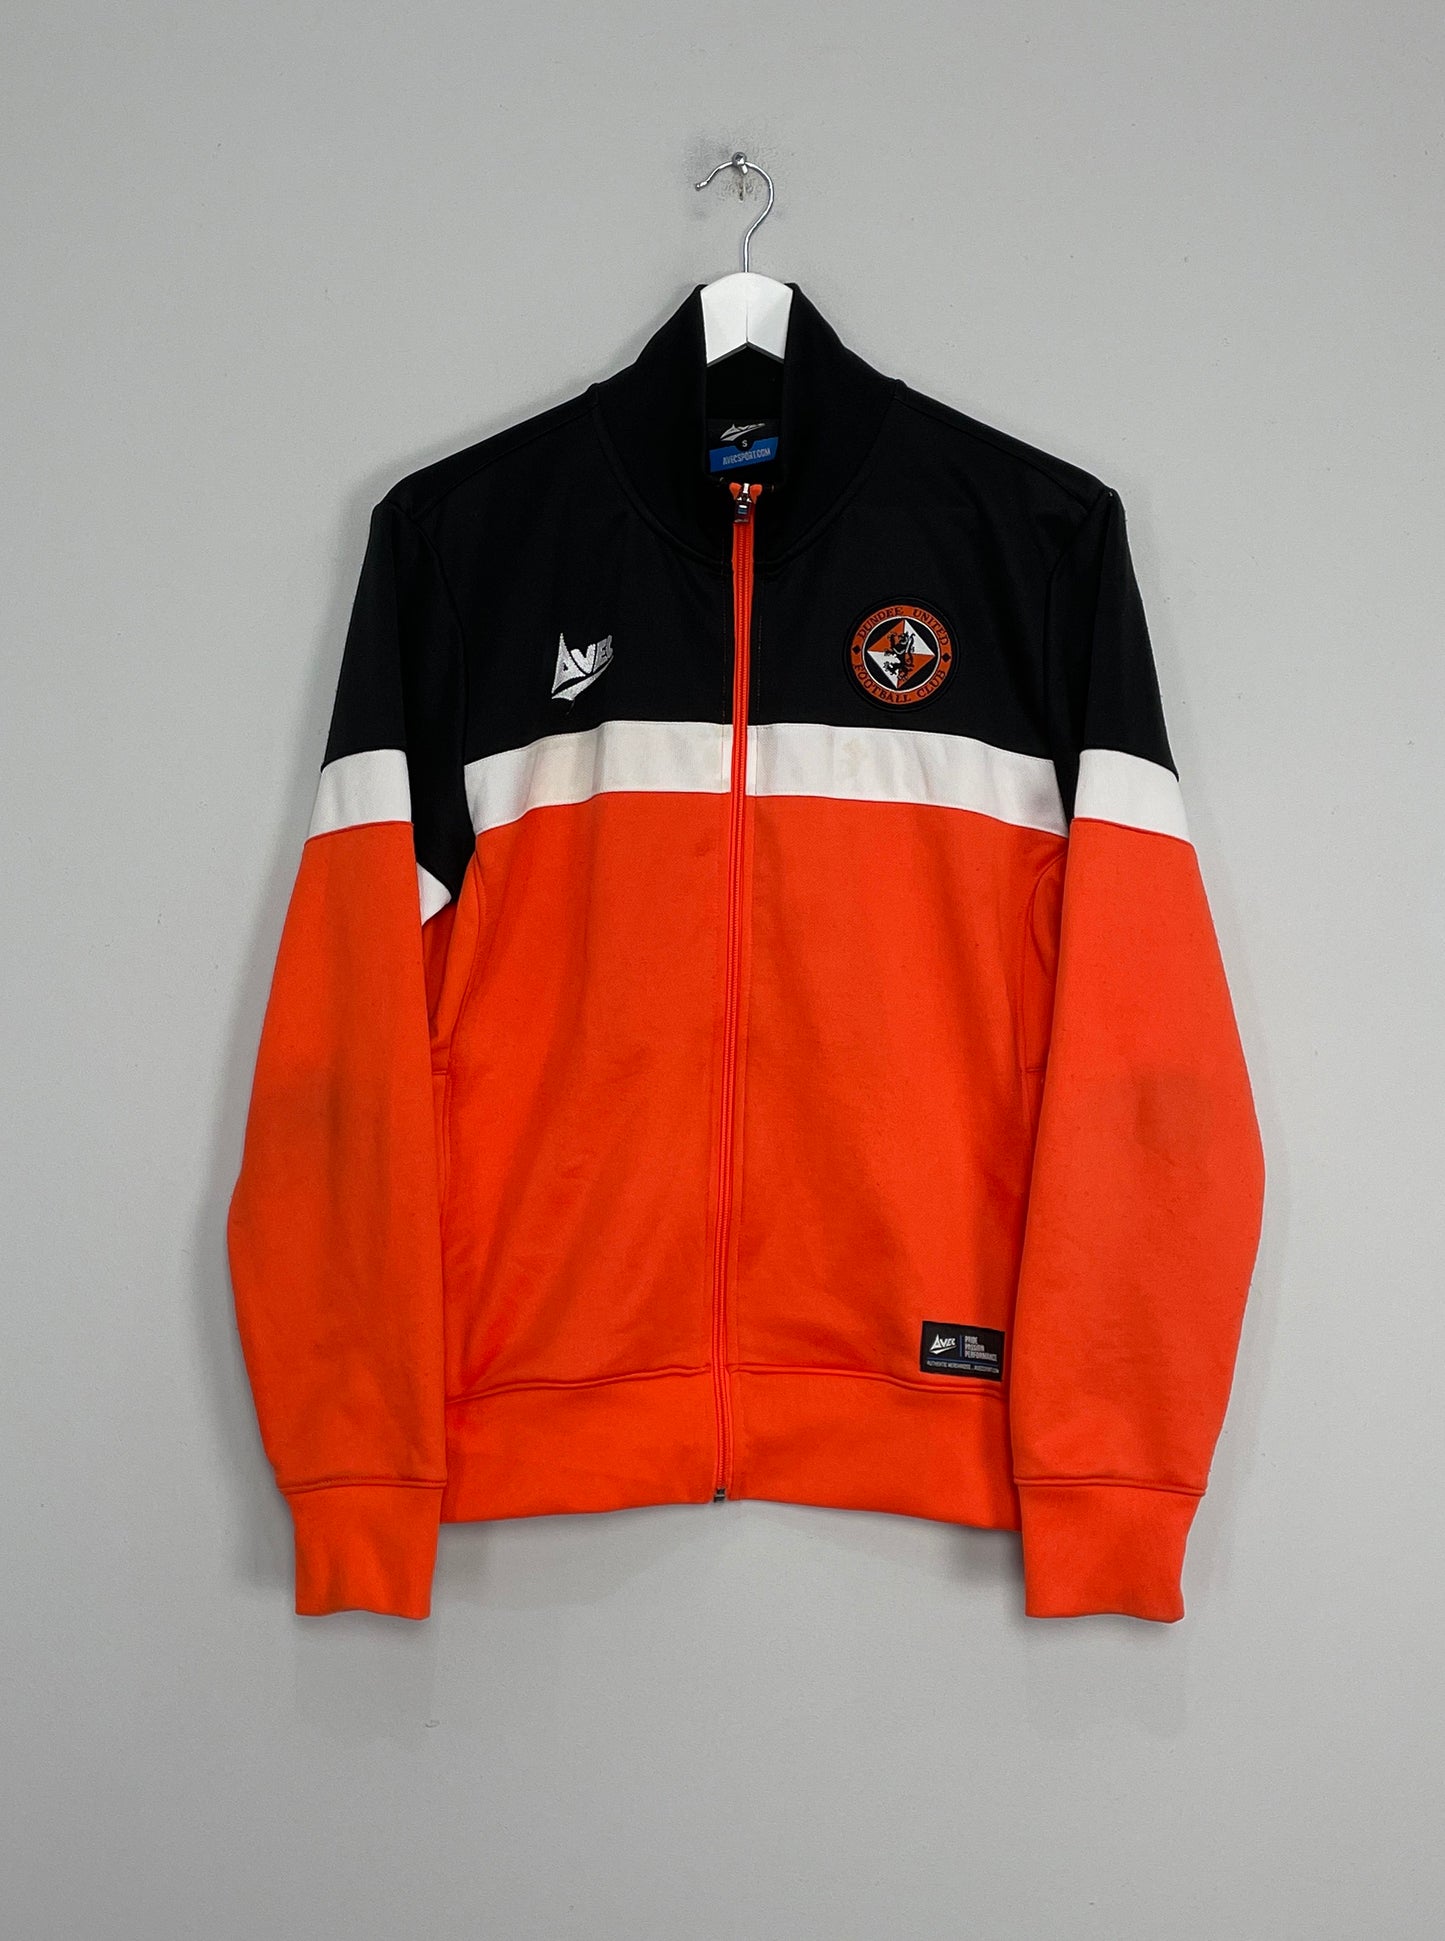 Image of the Dundee jacket from the 2010/12 season